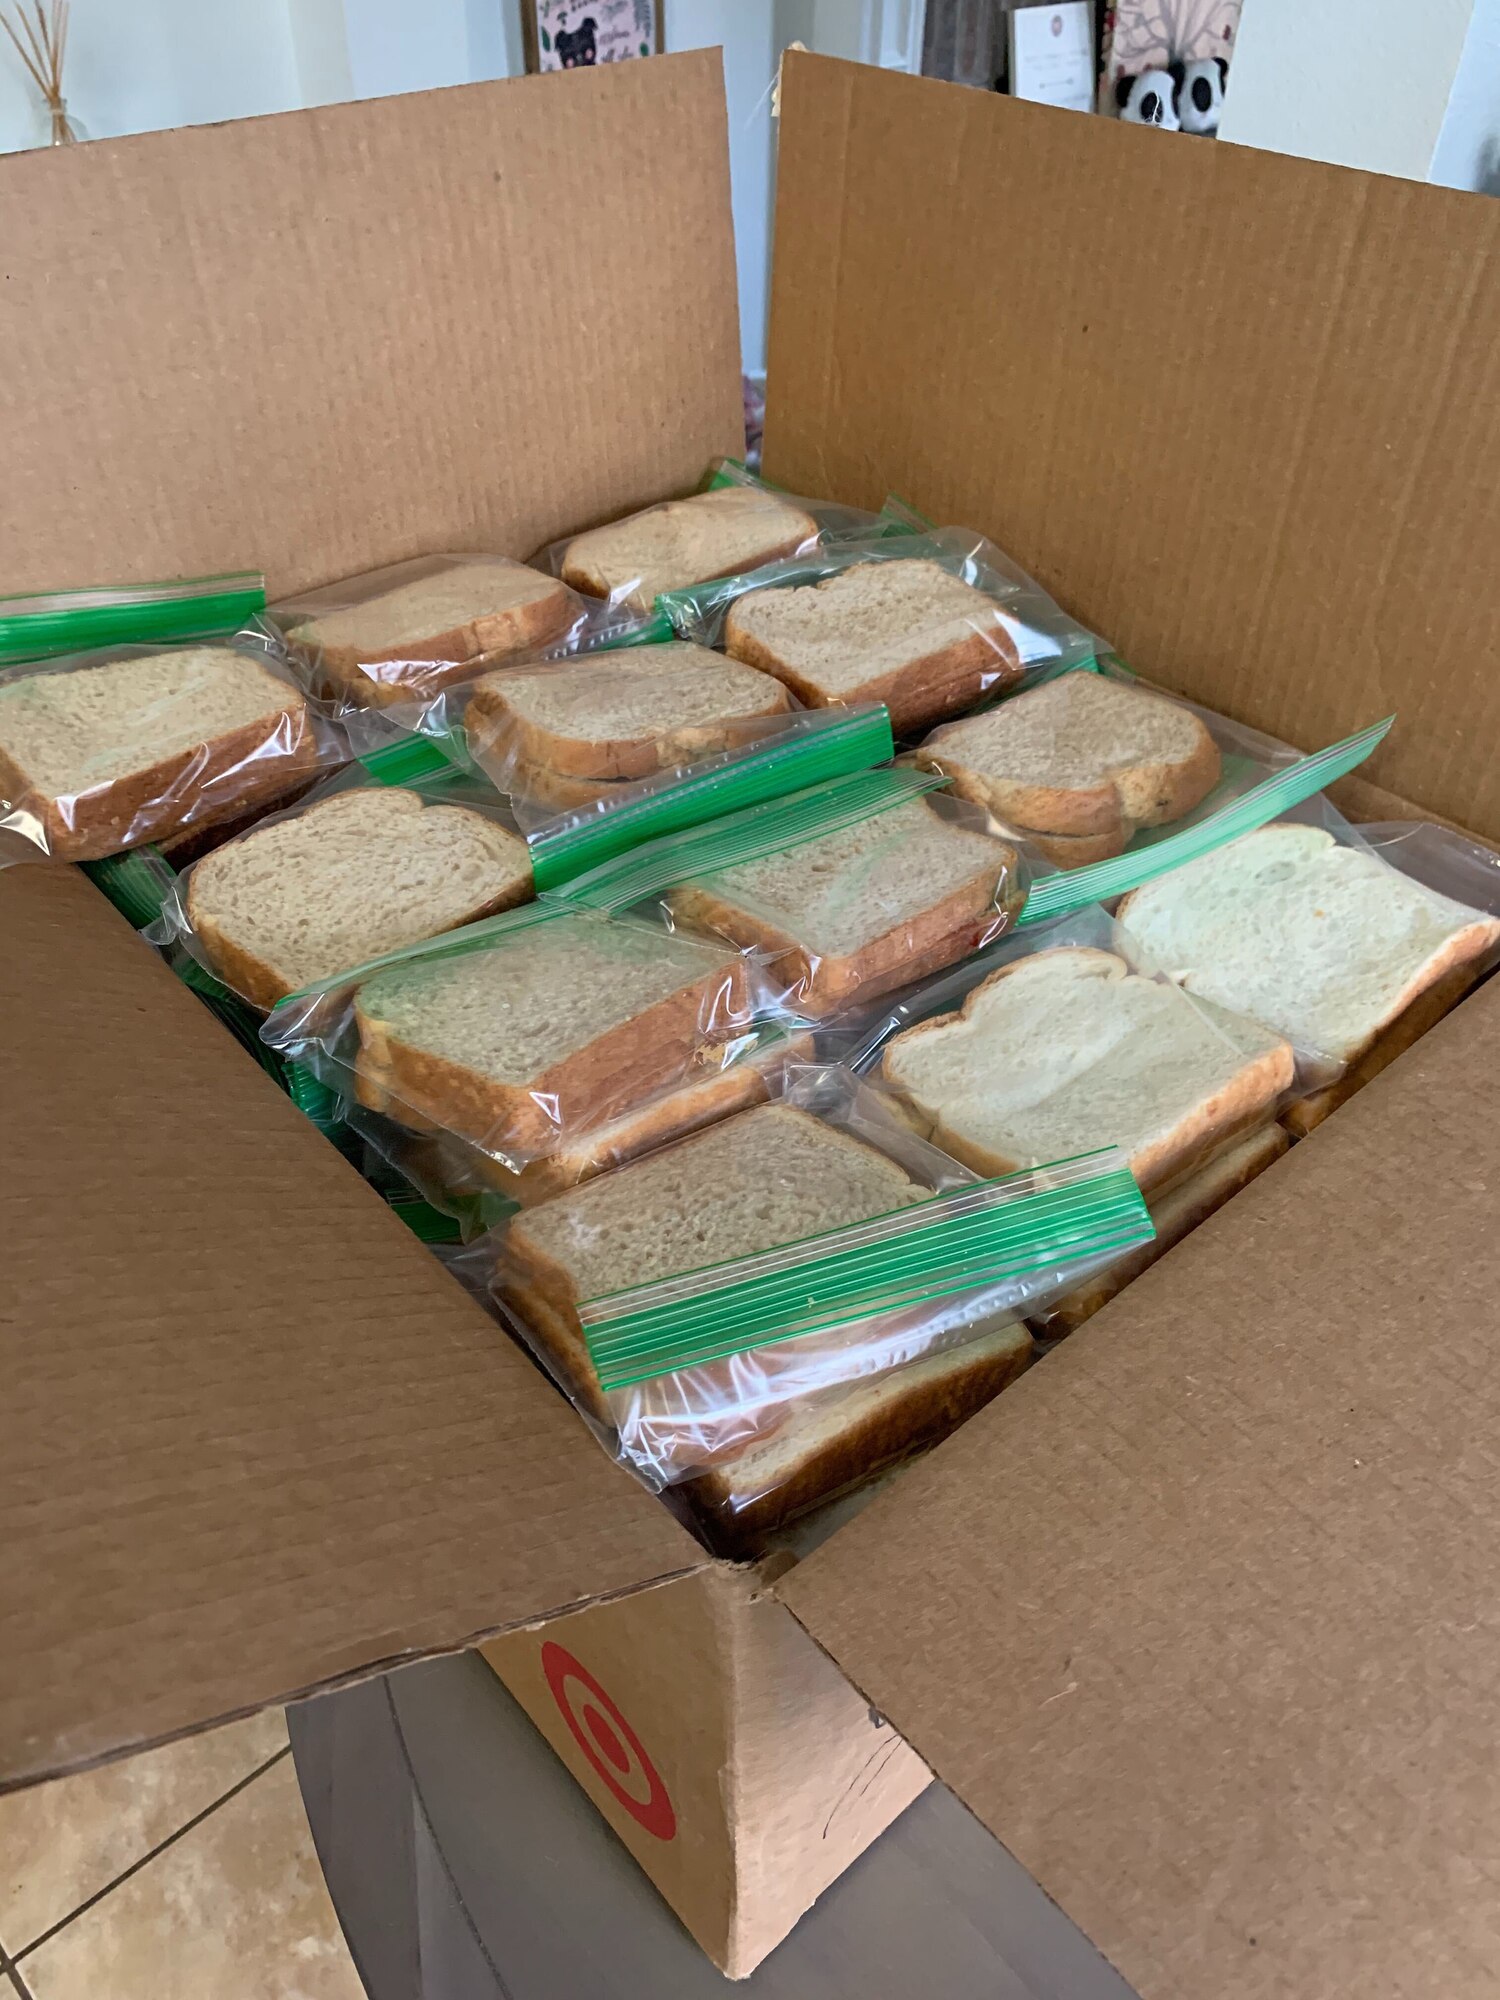 Reserve Citizen Airmen from the 23rd Intelligence Squadron donated more than 1,000 peanut butter and jelly sandwiches in the last month to local San Antonians in need.